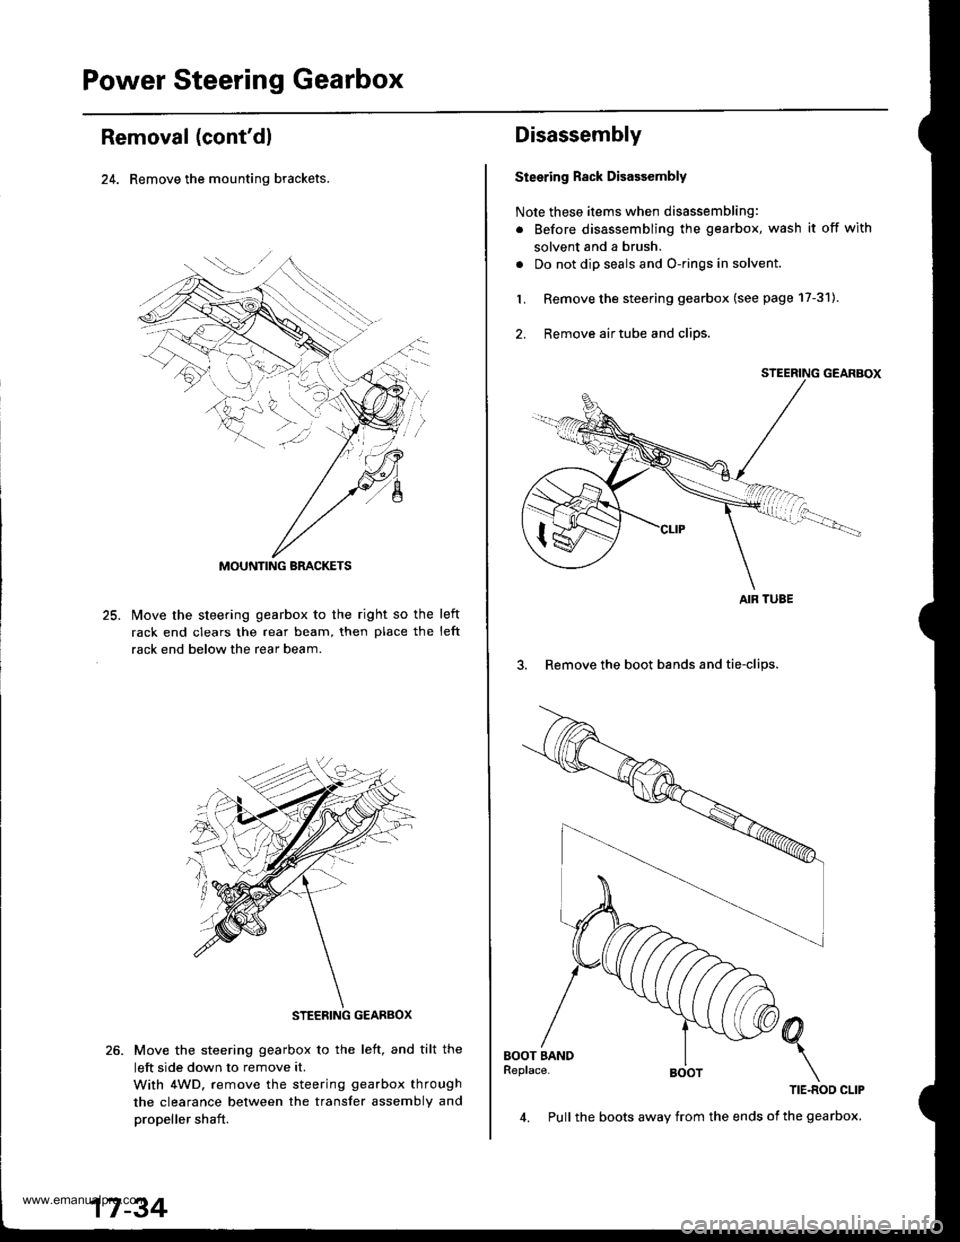 HONDA CR-V 1997 RD1-RD3 / 1.G Workshop Manual 
Power Steering Gearbox
Removal (contdl
24. Remove the mounting brackets.
25.lvlove the steering gearbox to the right so the
rack end clears the rear beam, then place the
rack end below the rear beam